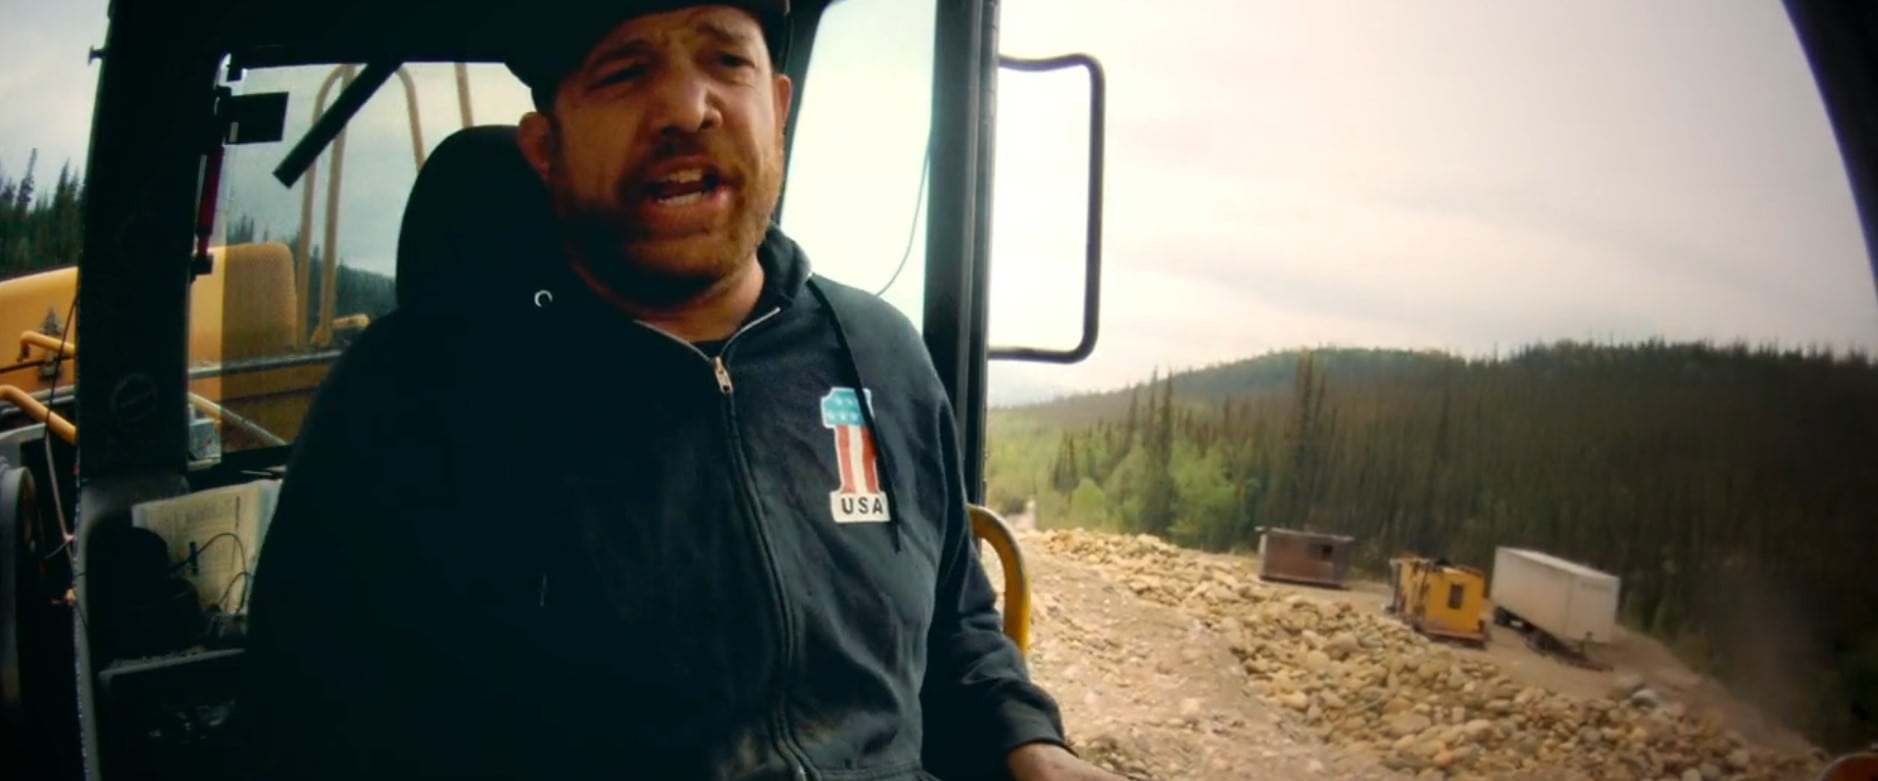 What Happened To Rick Ness On Gold Rush?